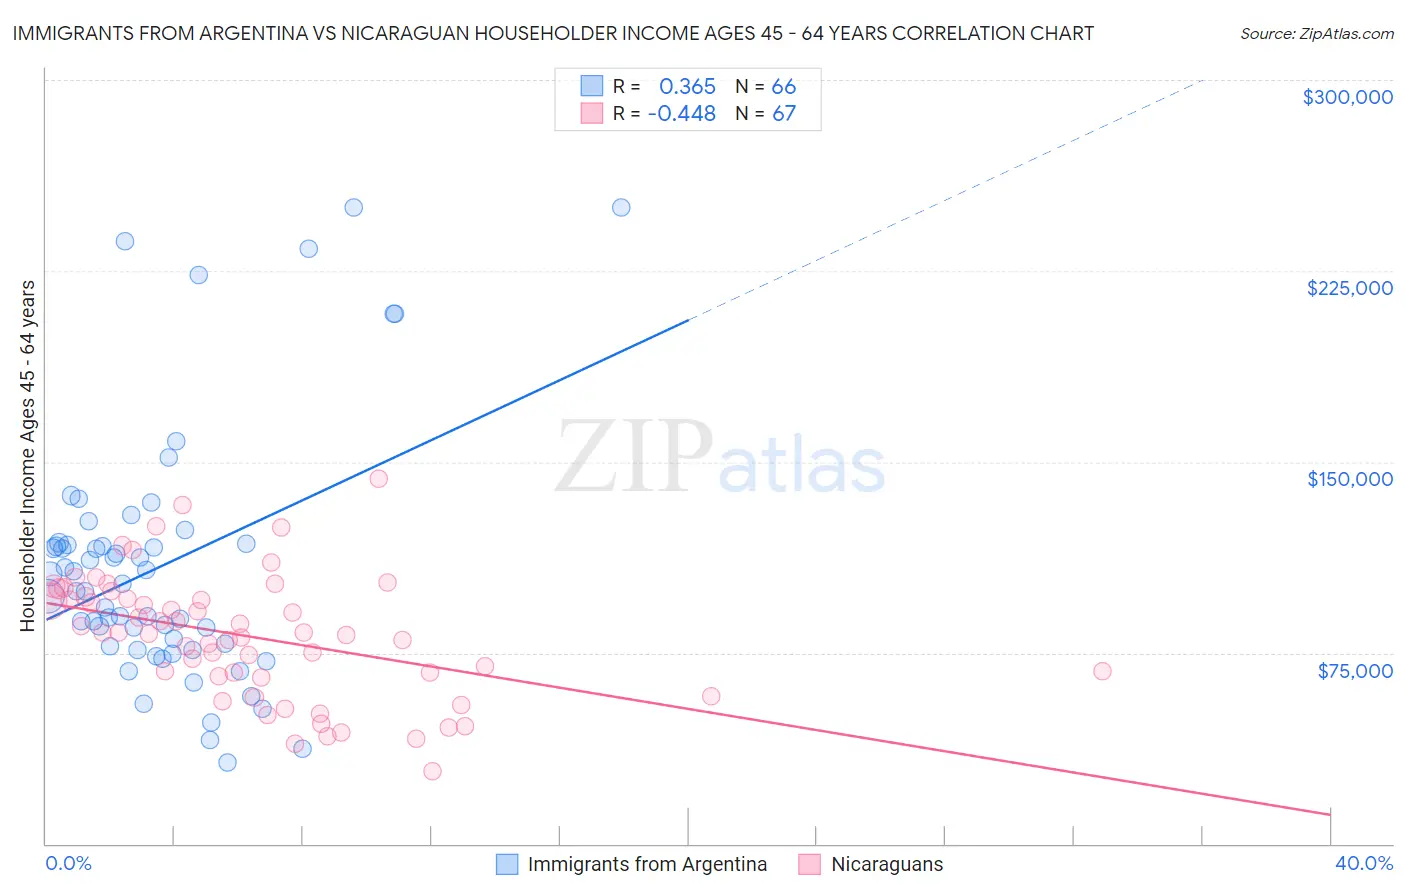 Immigrants from Argentina vs Nicaraguan Householder Income Ages 45 - 64 years